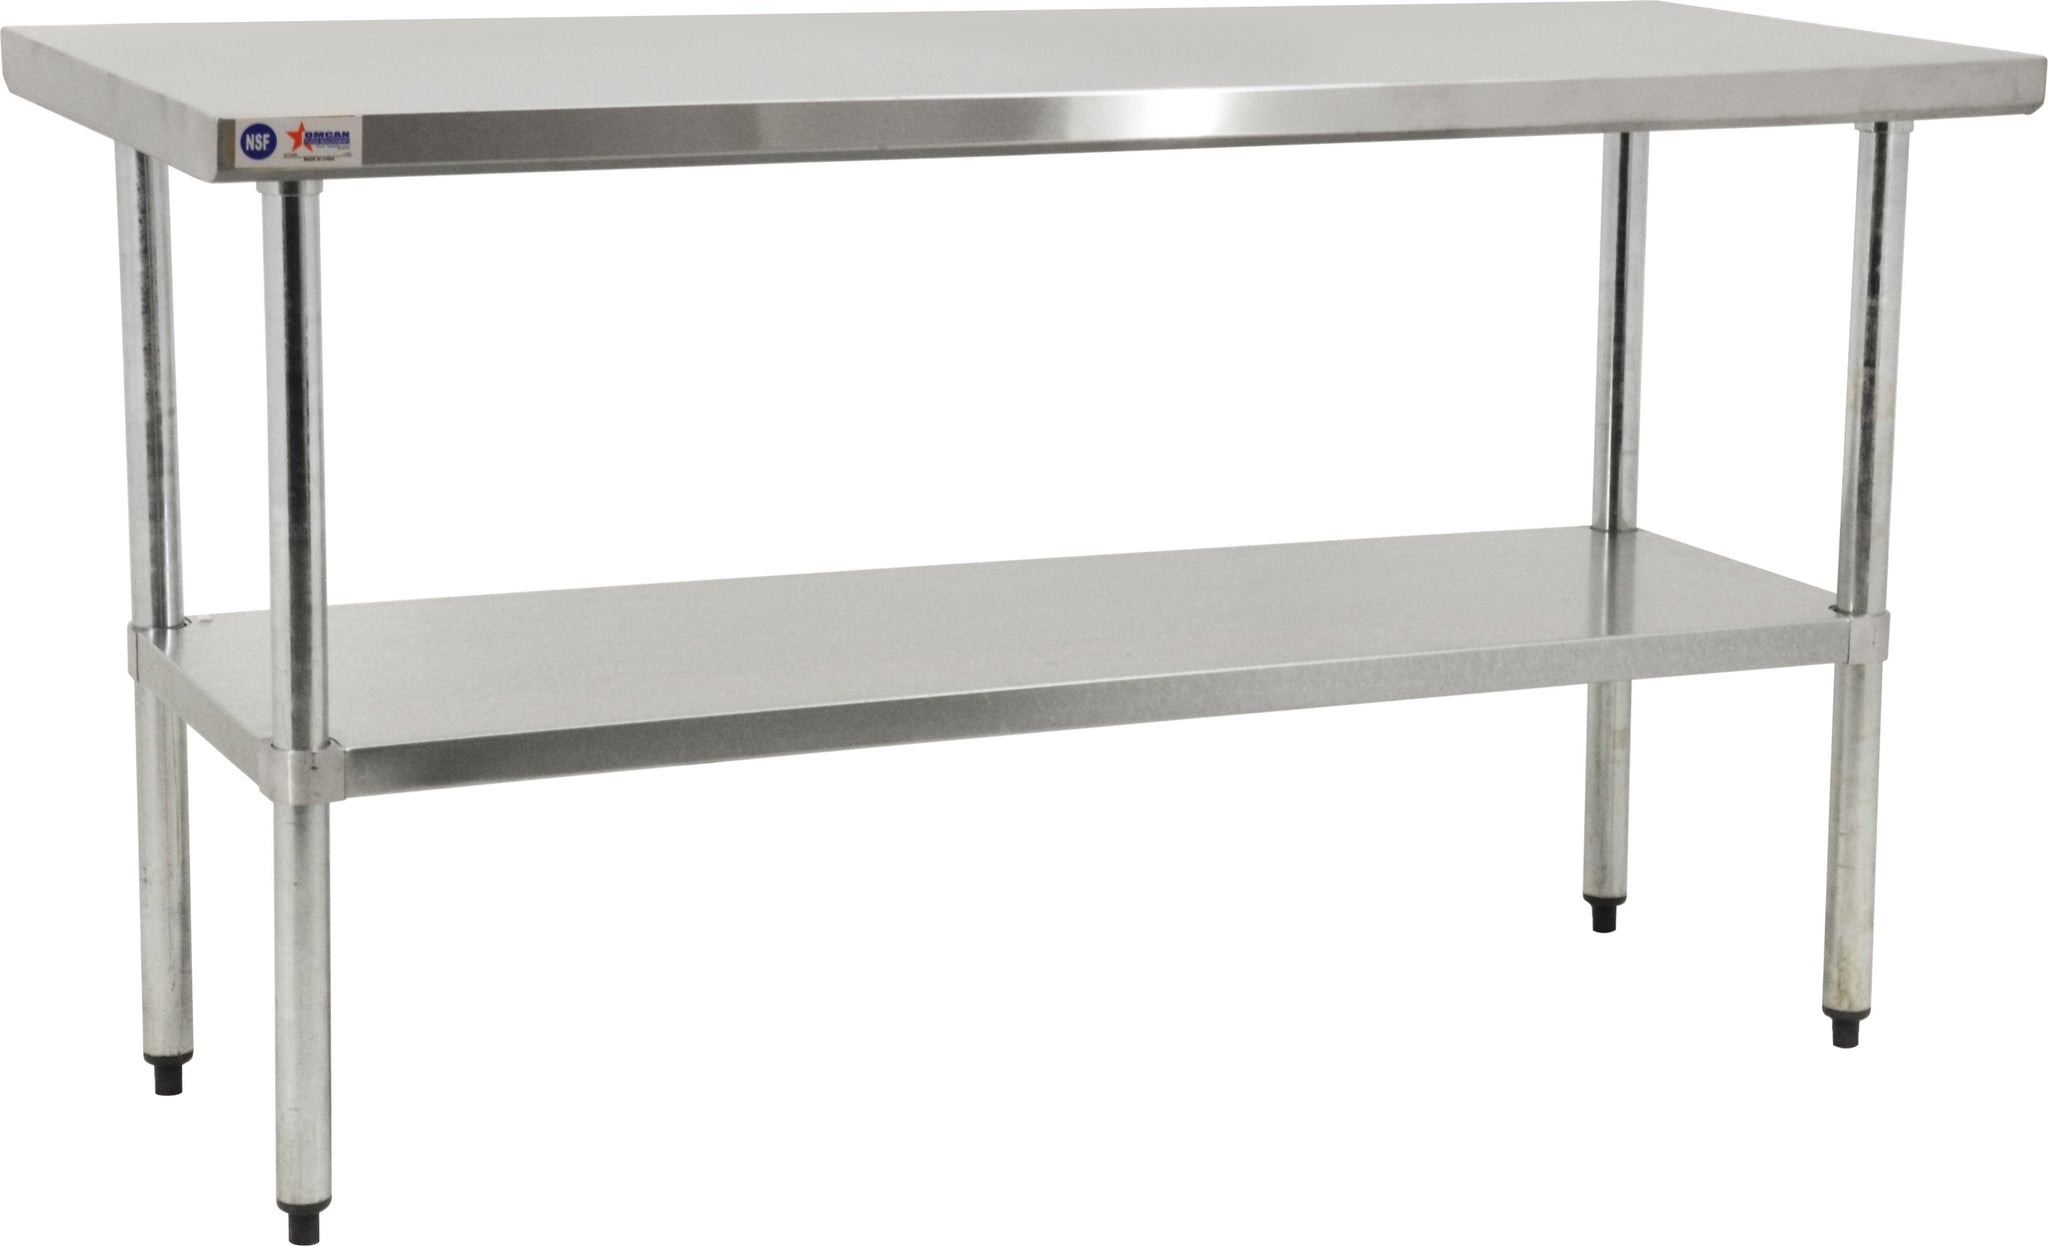 Omcan - 24” x 36” Stainless Steel Work Table - 19137